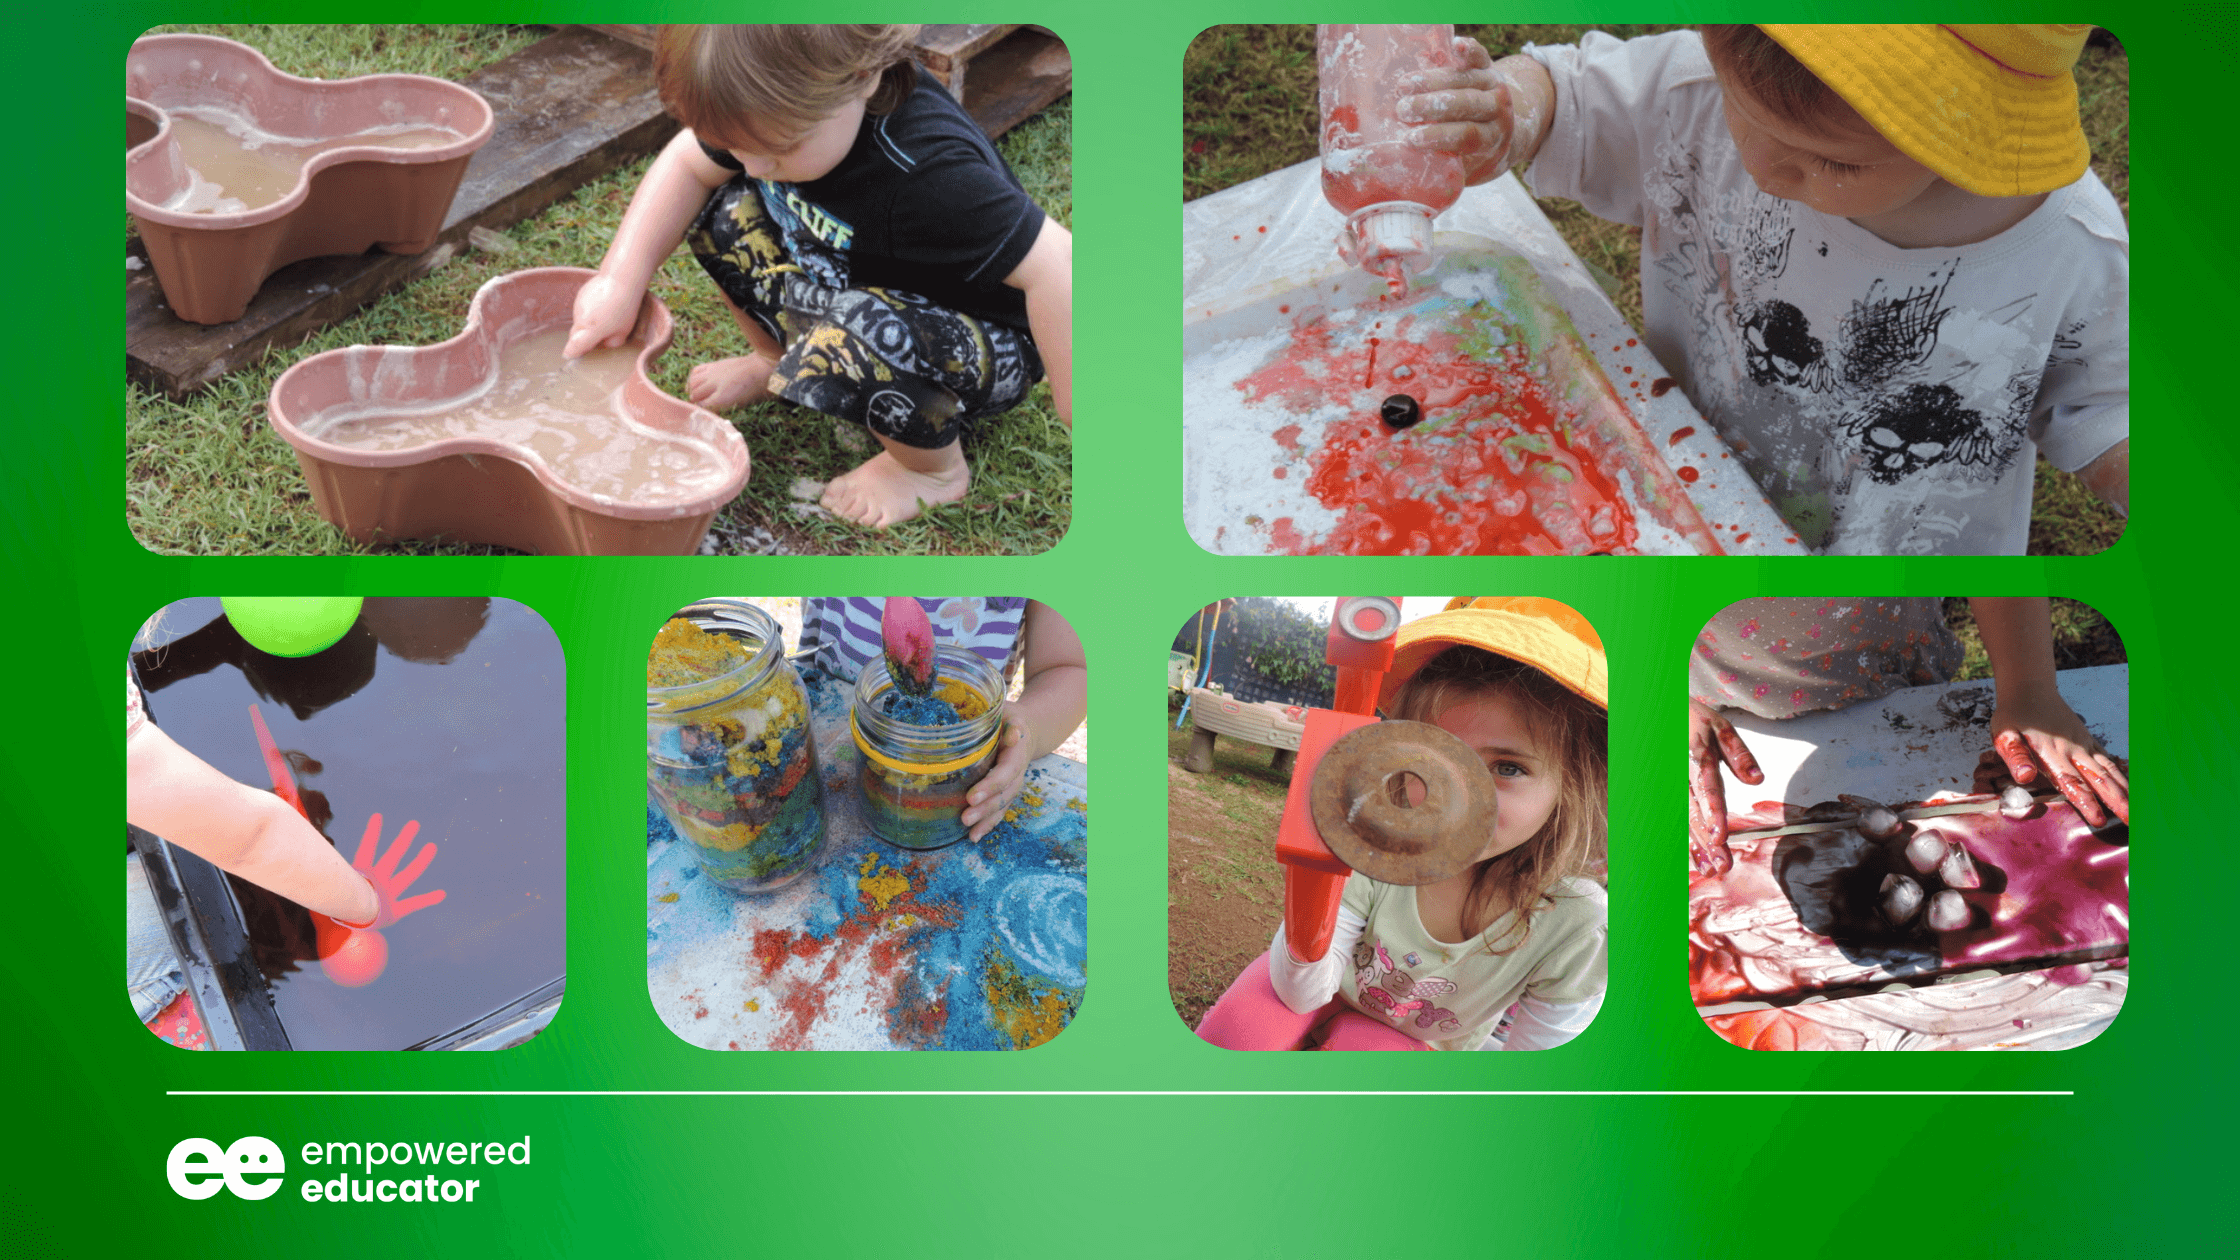 Children using everyday materials to experiment and discover STEM concepts through play